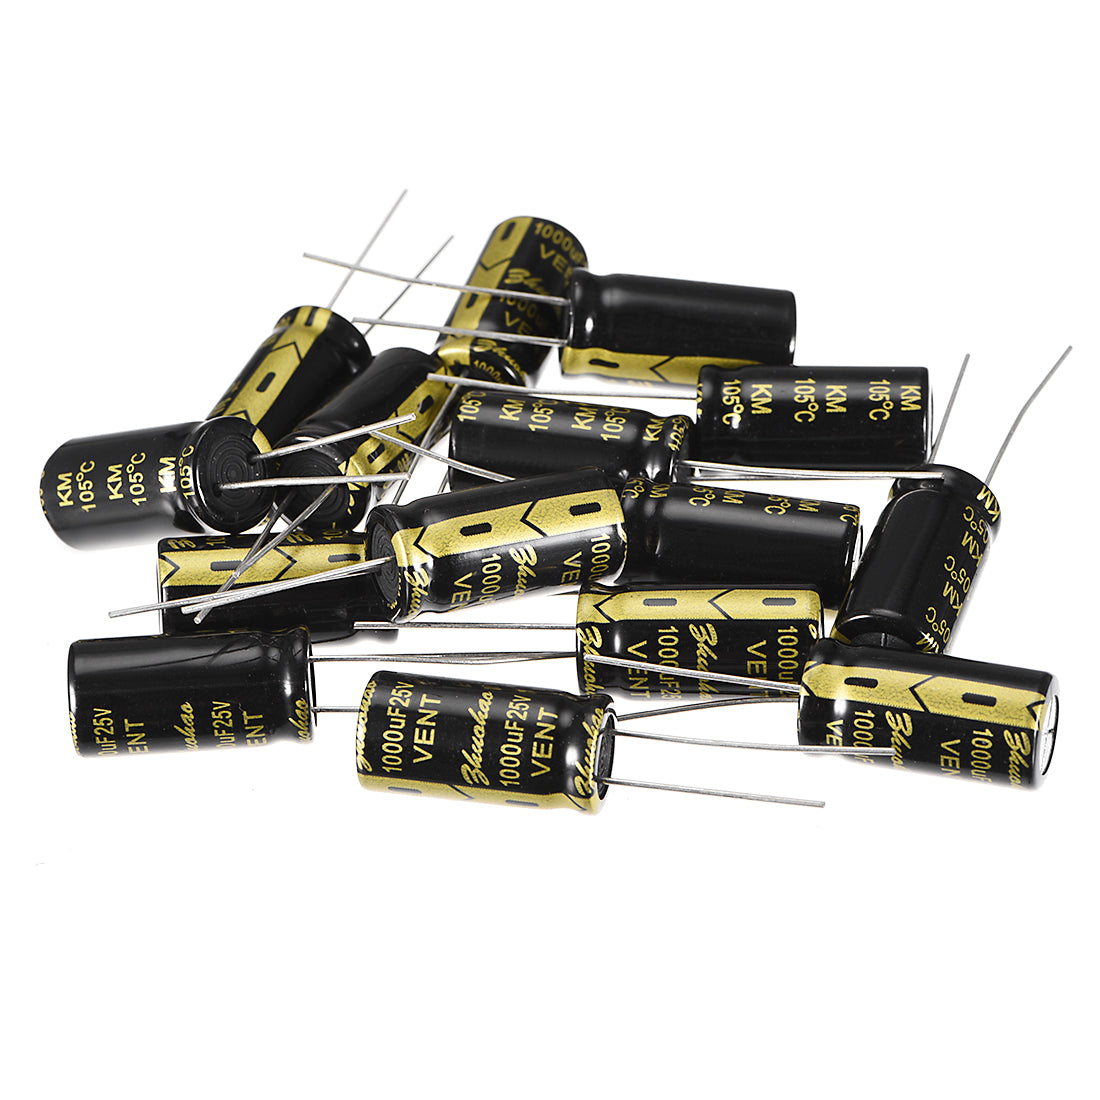 uxcell Uxcell Aluminum Radial Electrolytic Capacitor with 1000uF 25V 105 Celsius Life 2000H 10 x 20 mm Black 15pcs